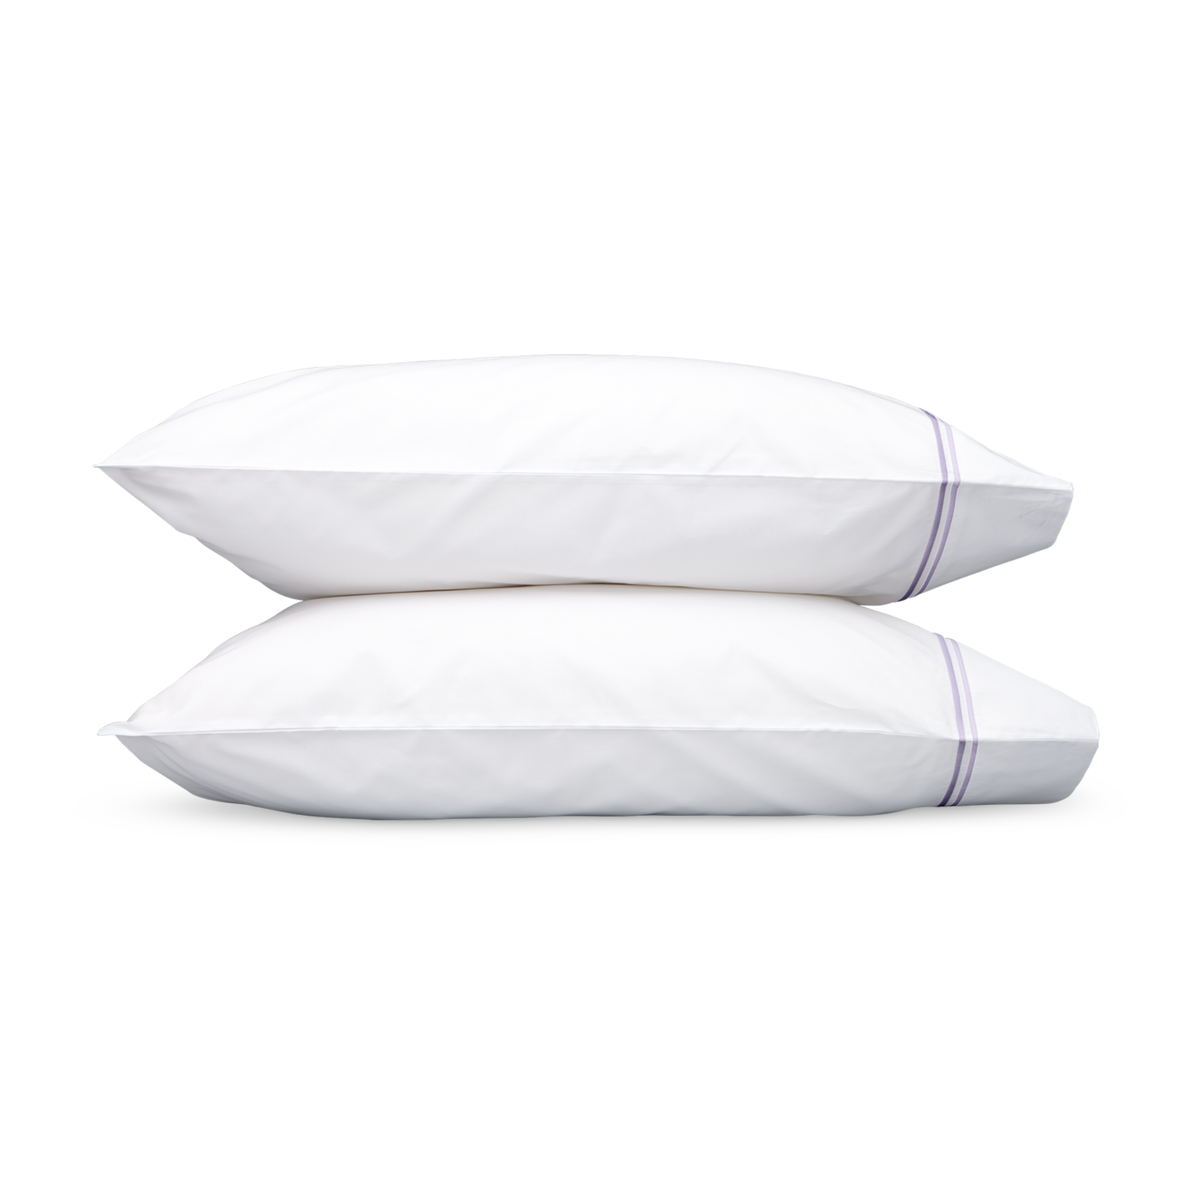 Pair of Pillowcases of Matouk Essex Bedding Collection in Lilac  Color